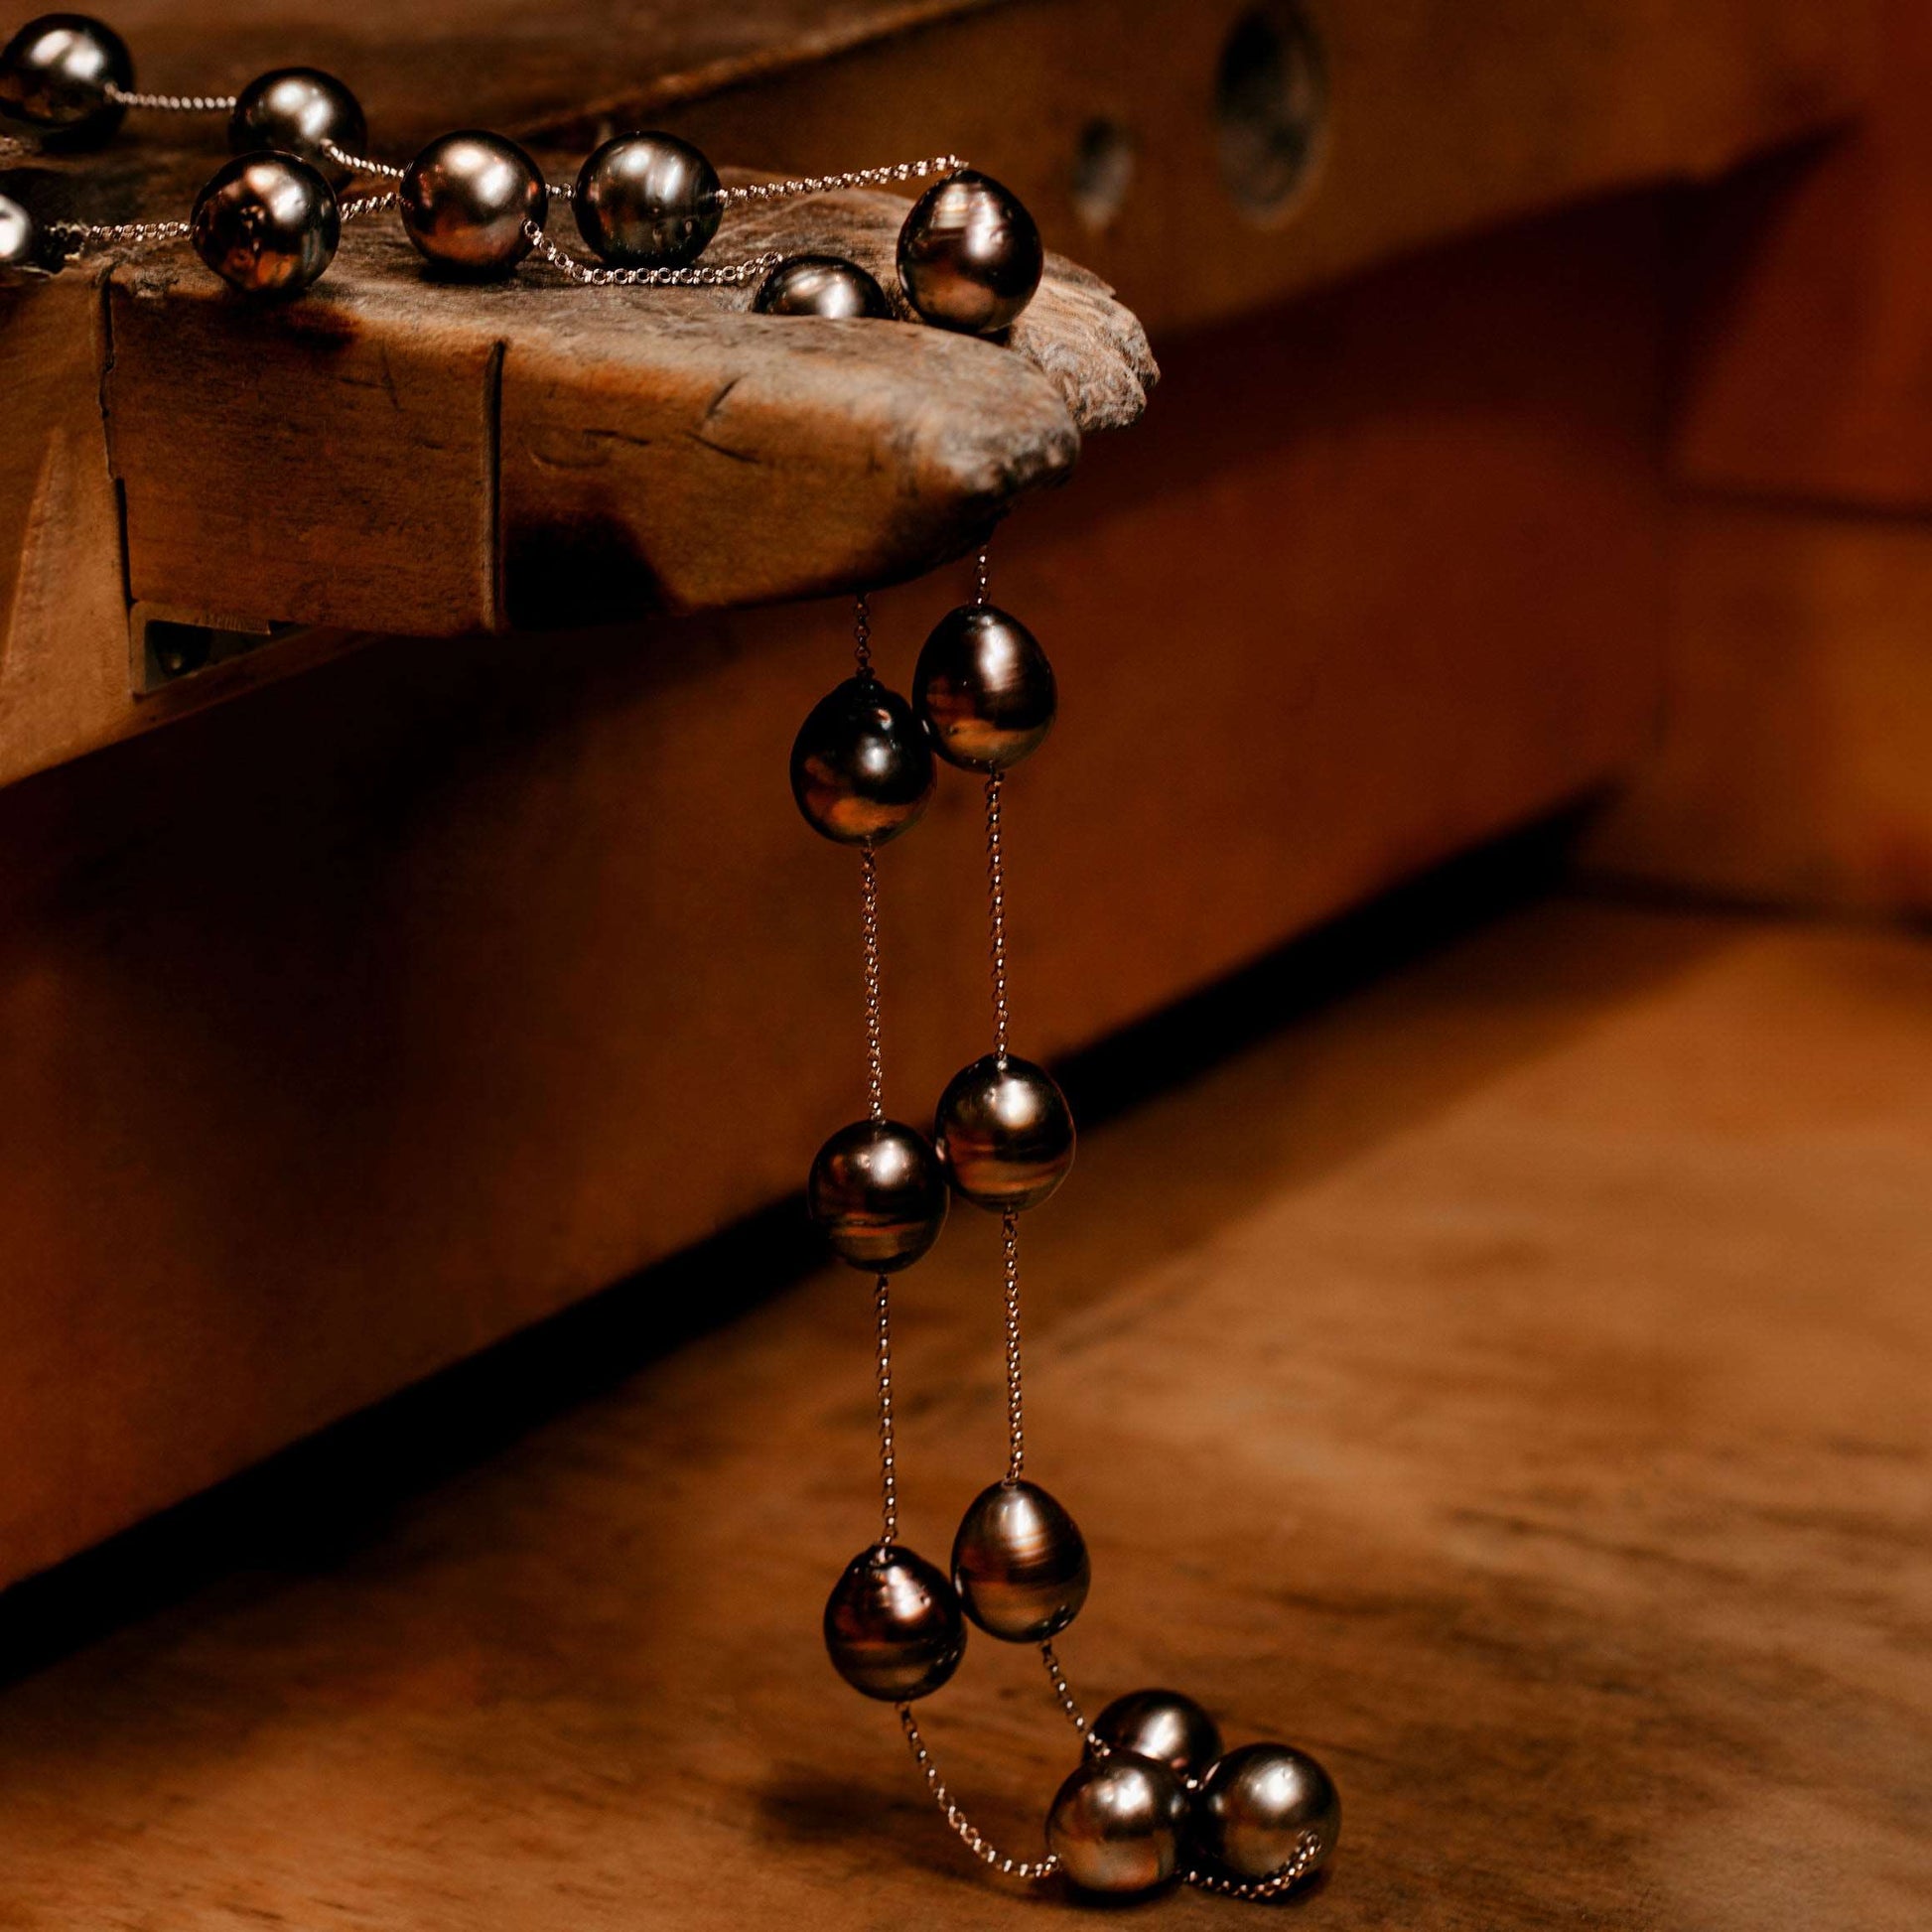 Black Tahitian Cultured Pearl Necklace on a wooden table